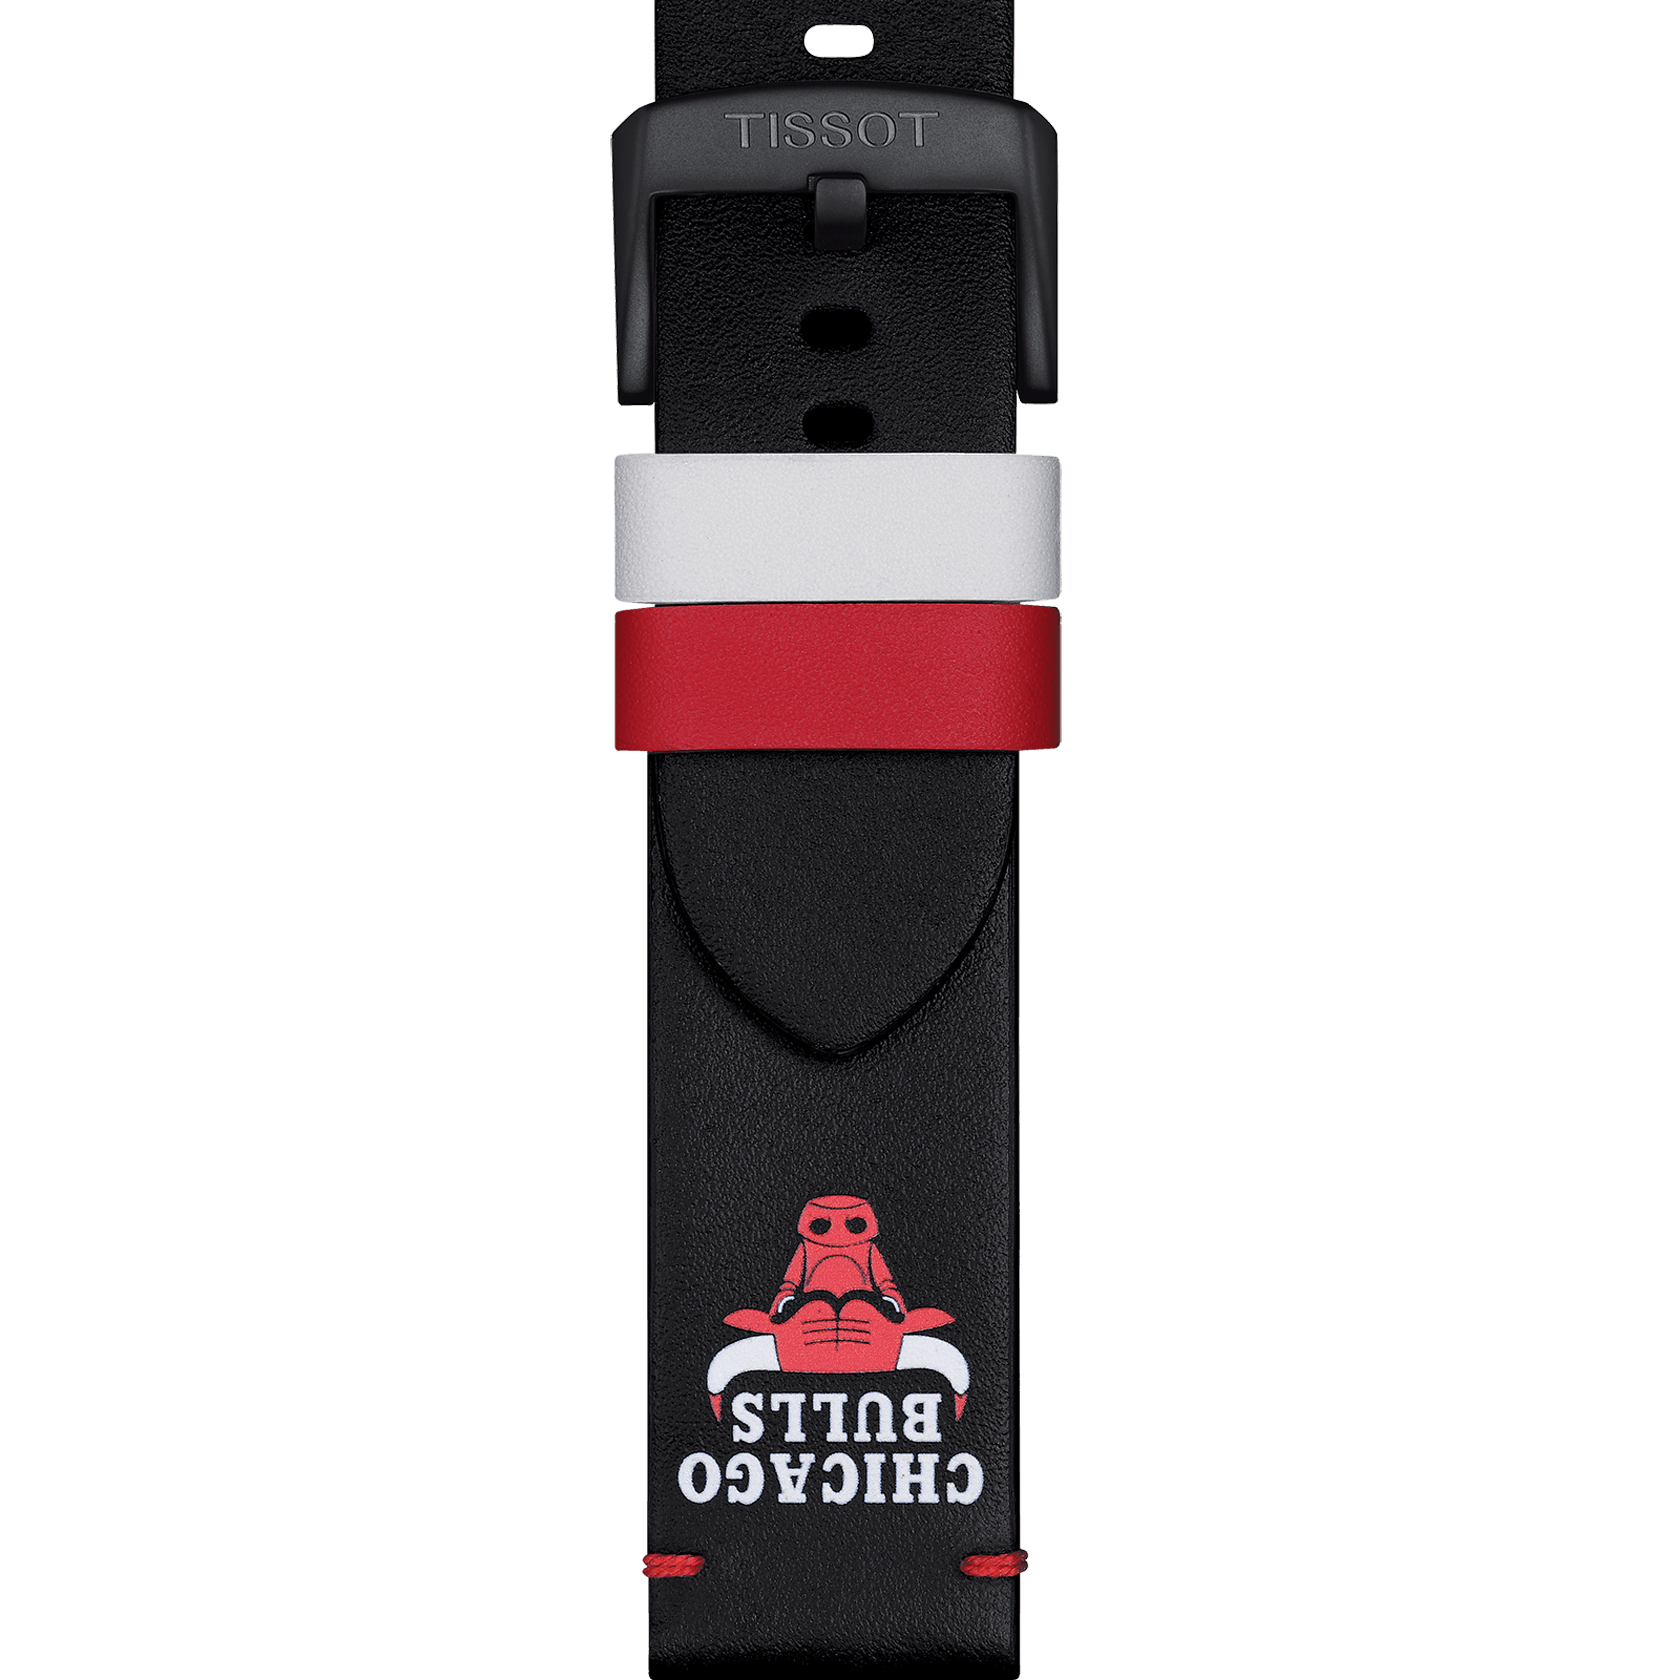 Tissot Official NBA leather strap Chicago Bulls 22mm